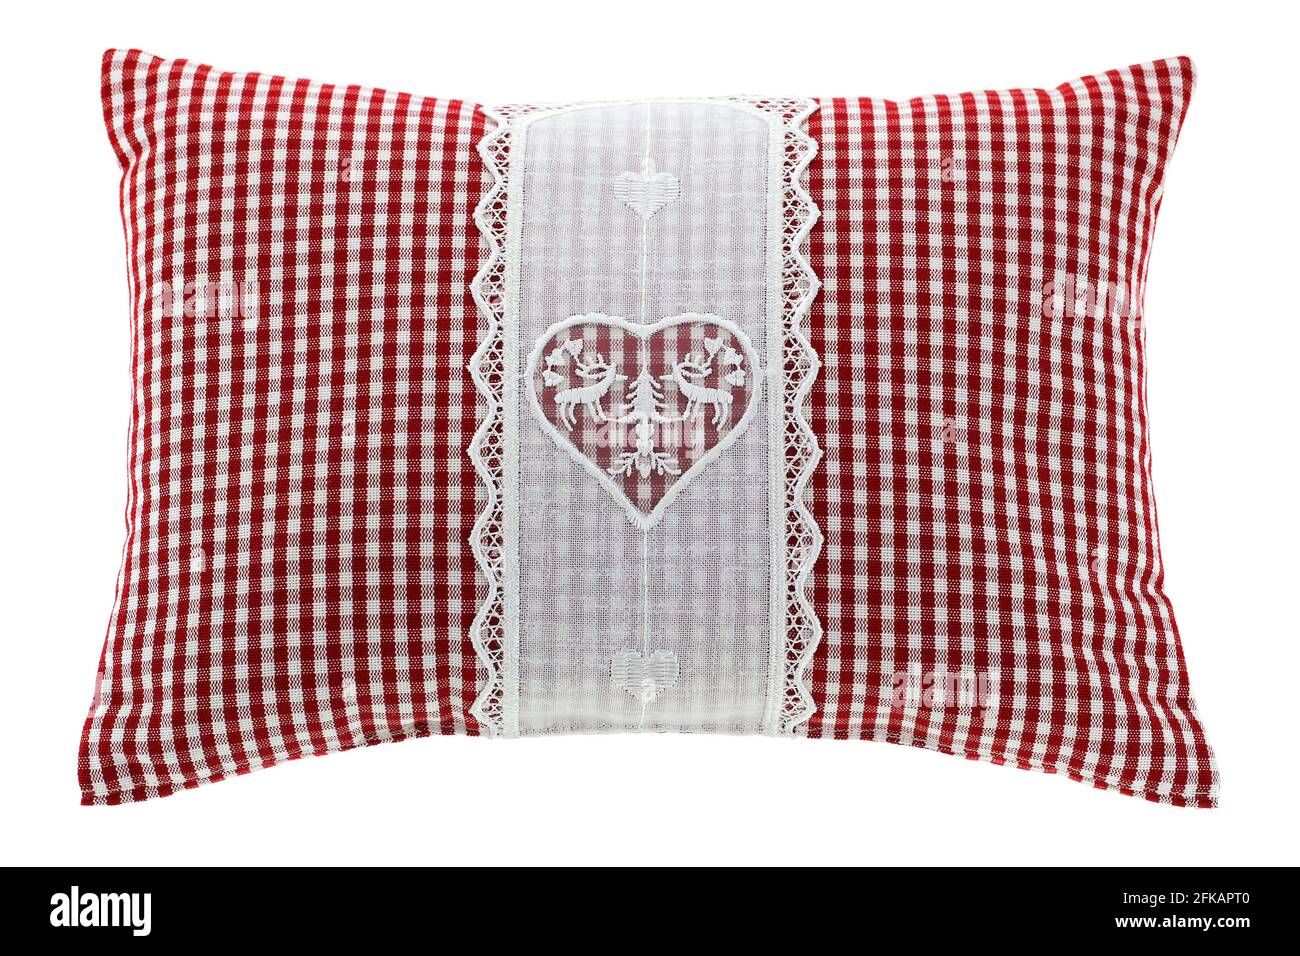 Closeup of a red gingham pillow with flake of Swiss stone pine inside, decorated with hand-made vintage crochet lace, isolated on white background Stock Photo